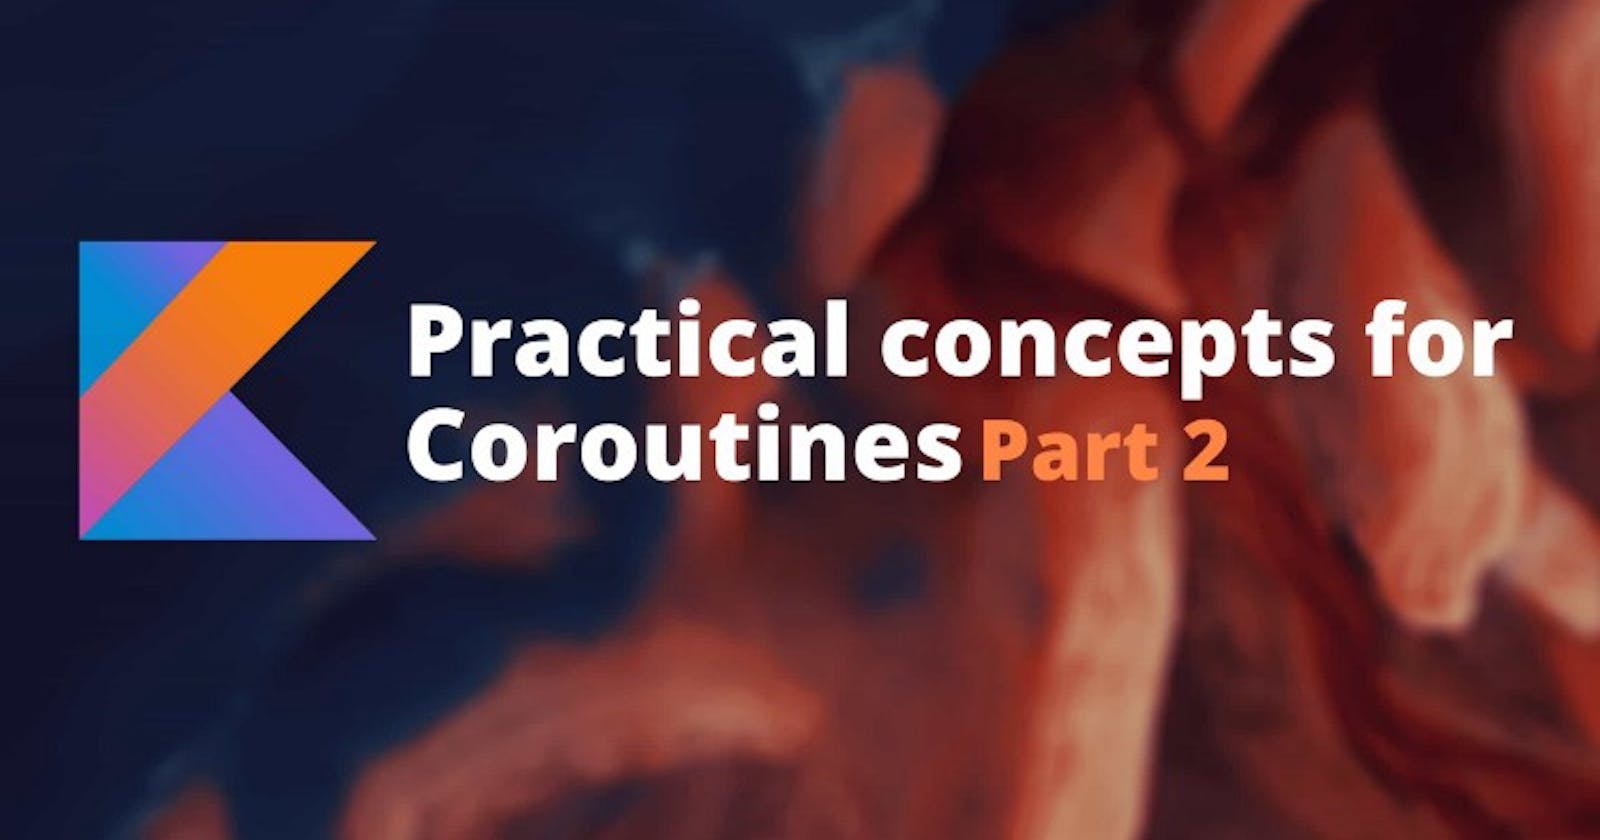 Practical concepts for Coroutines (Part 2)